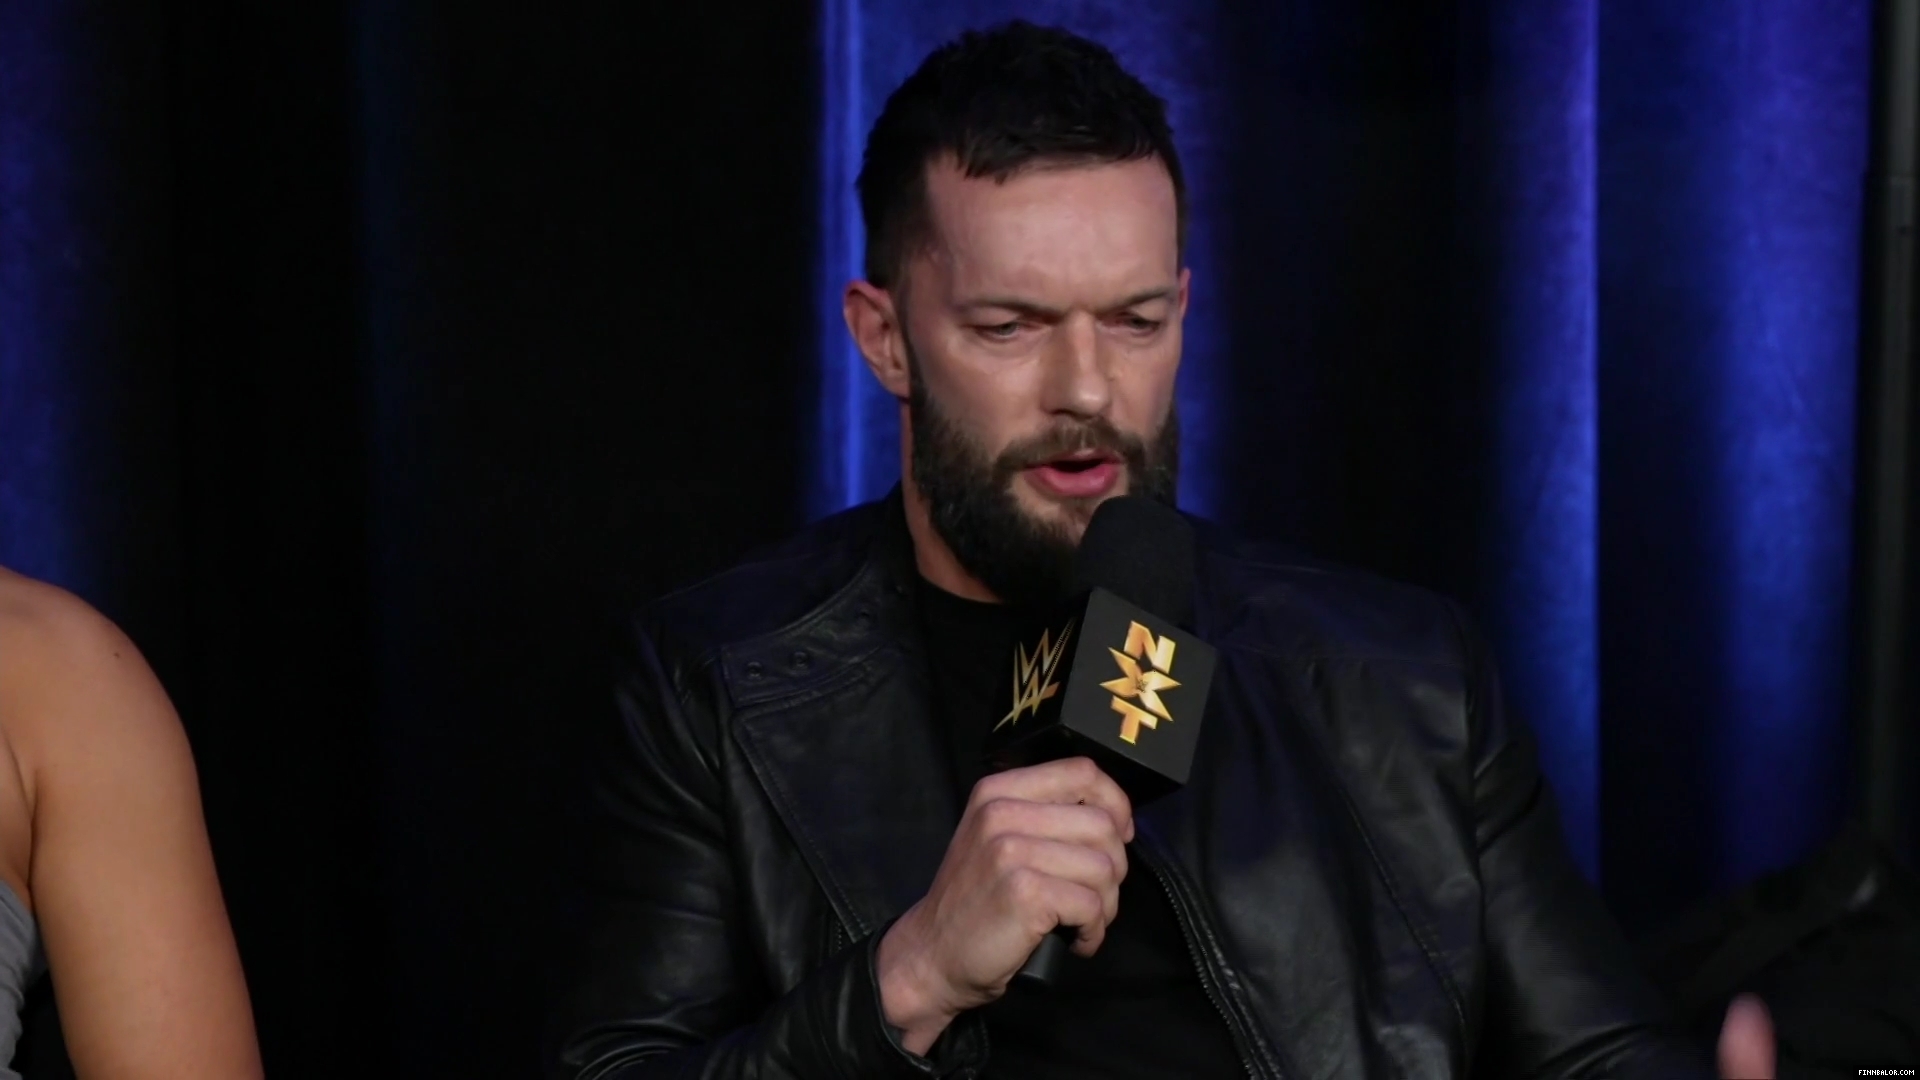 WWE_NXT_TakeOver_Stand_and_Deliver_2021_Global_Press_Conference_1080p_WEB_h264-HEEL_mp40204.jpg